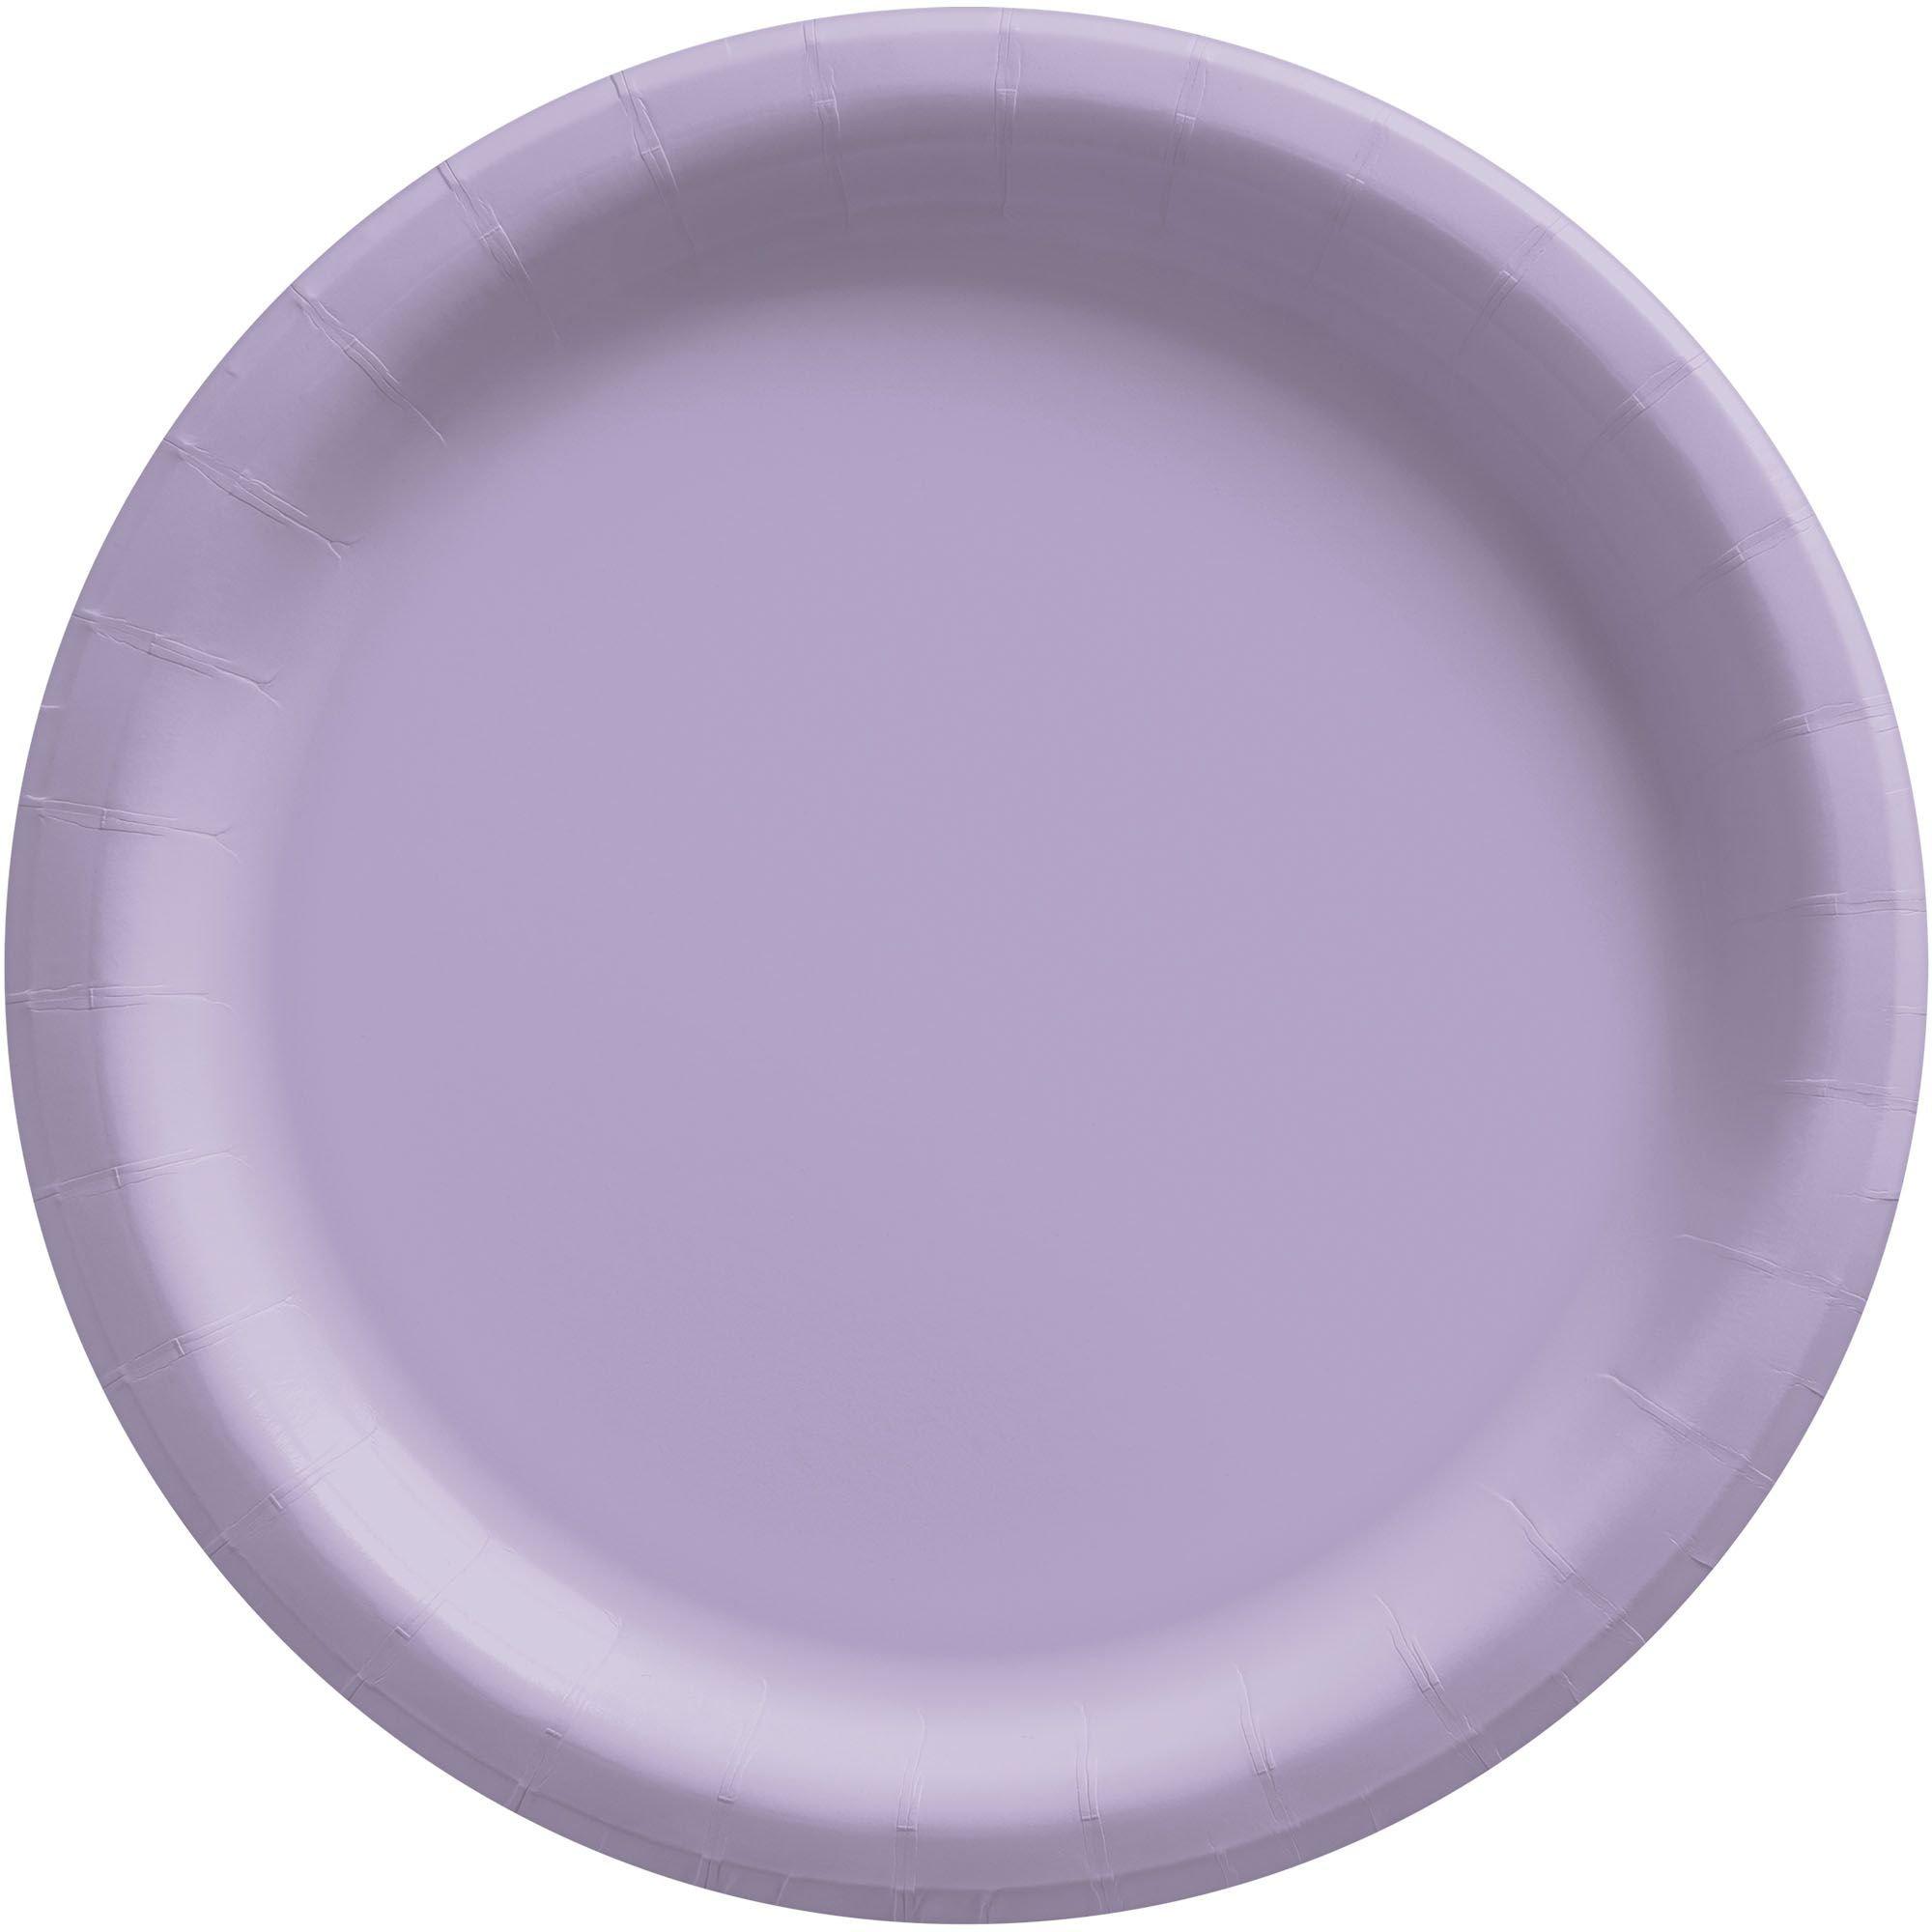 Pink Extra Sturdy Paper Dinner Plates, 10in, 20ct